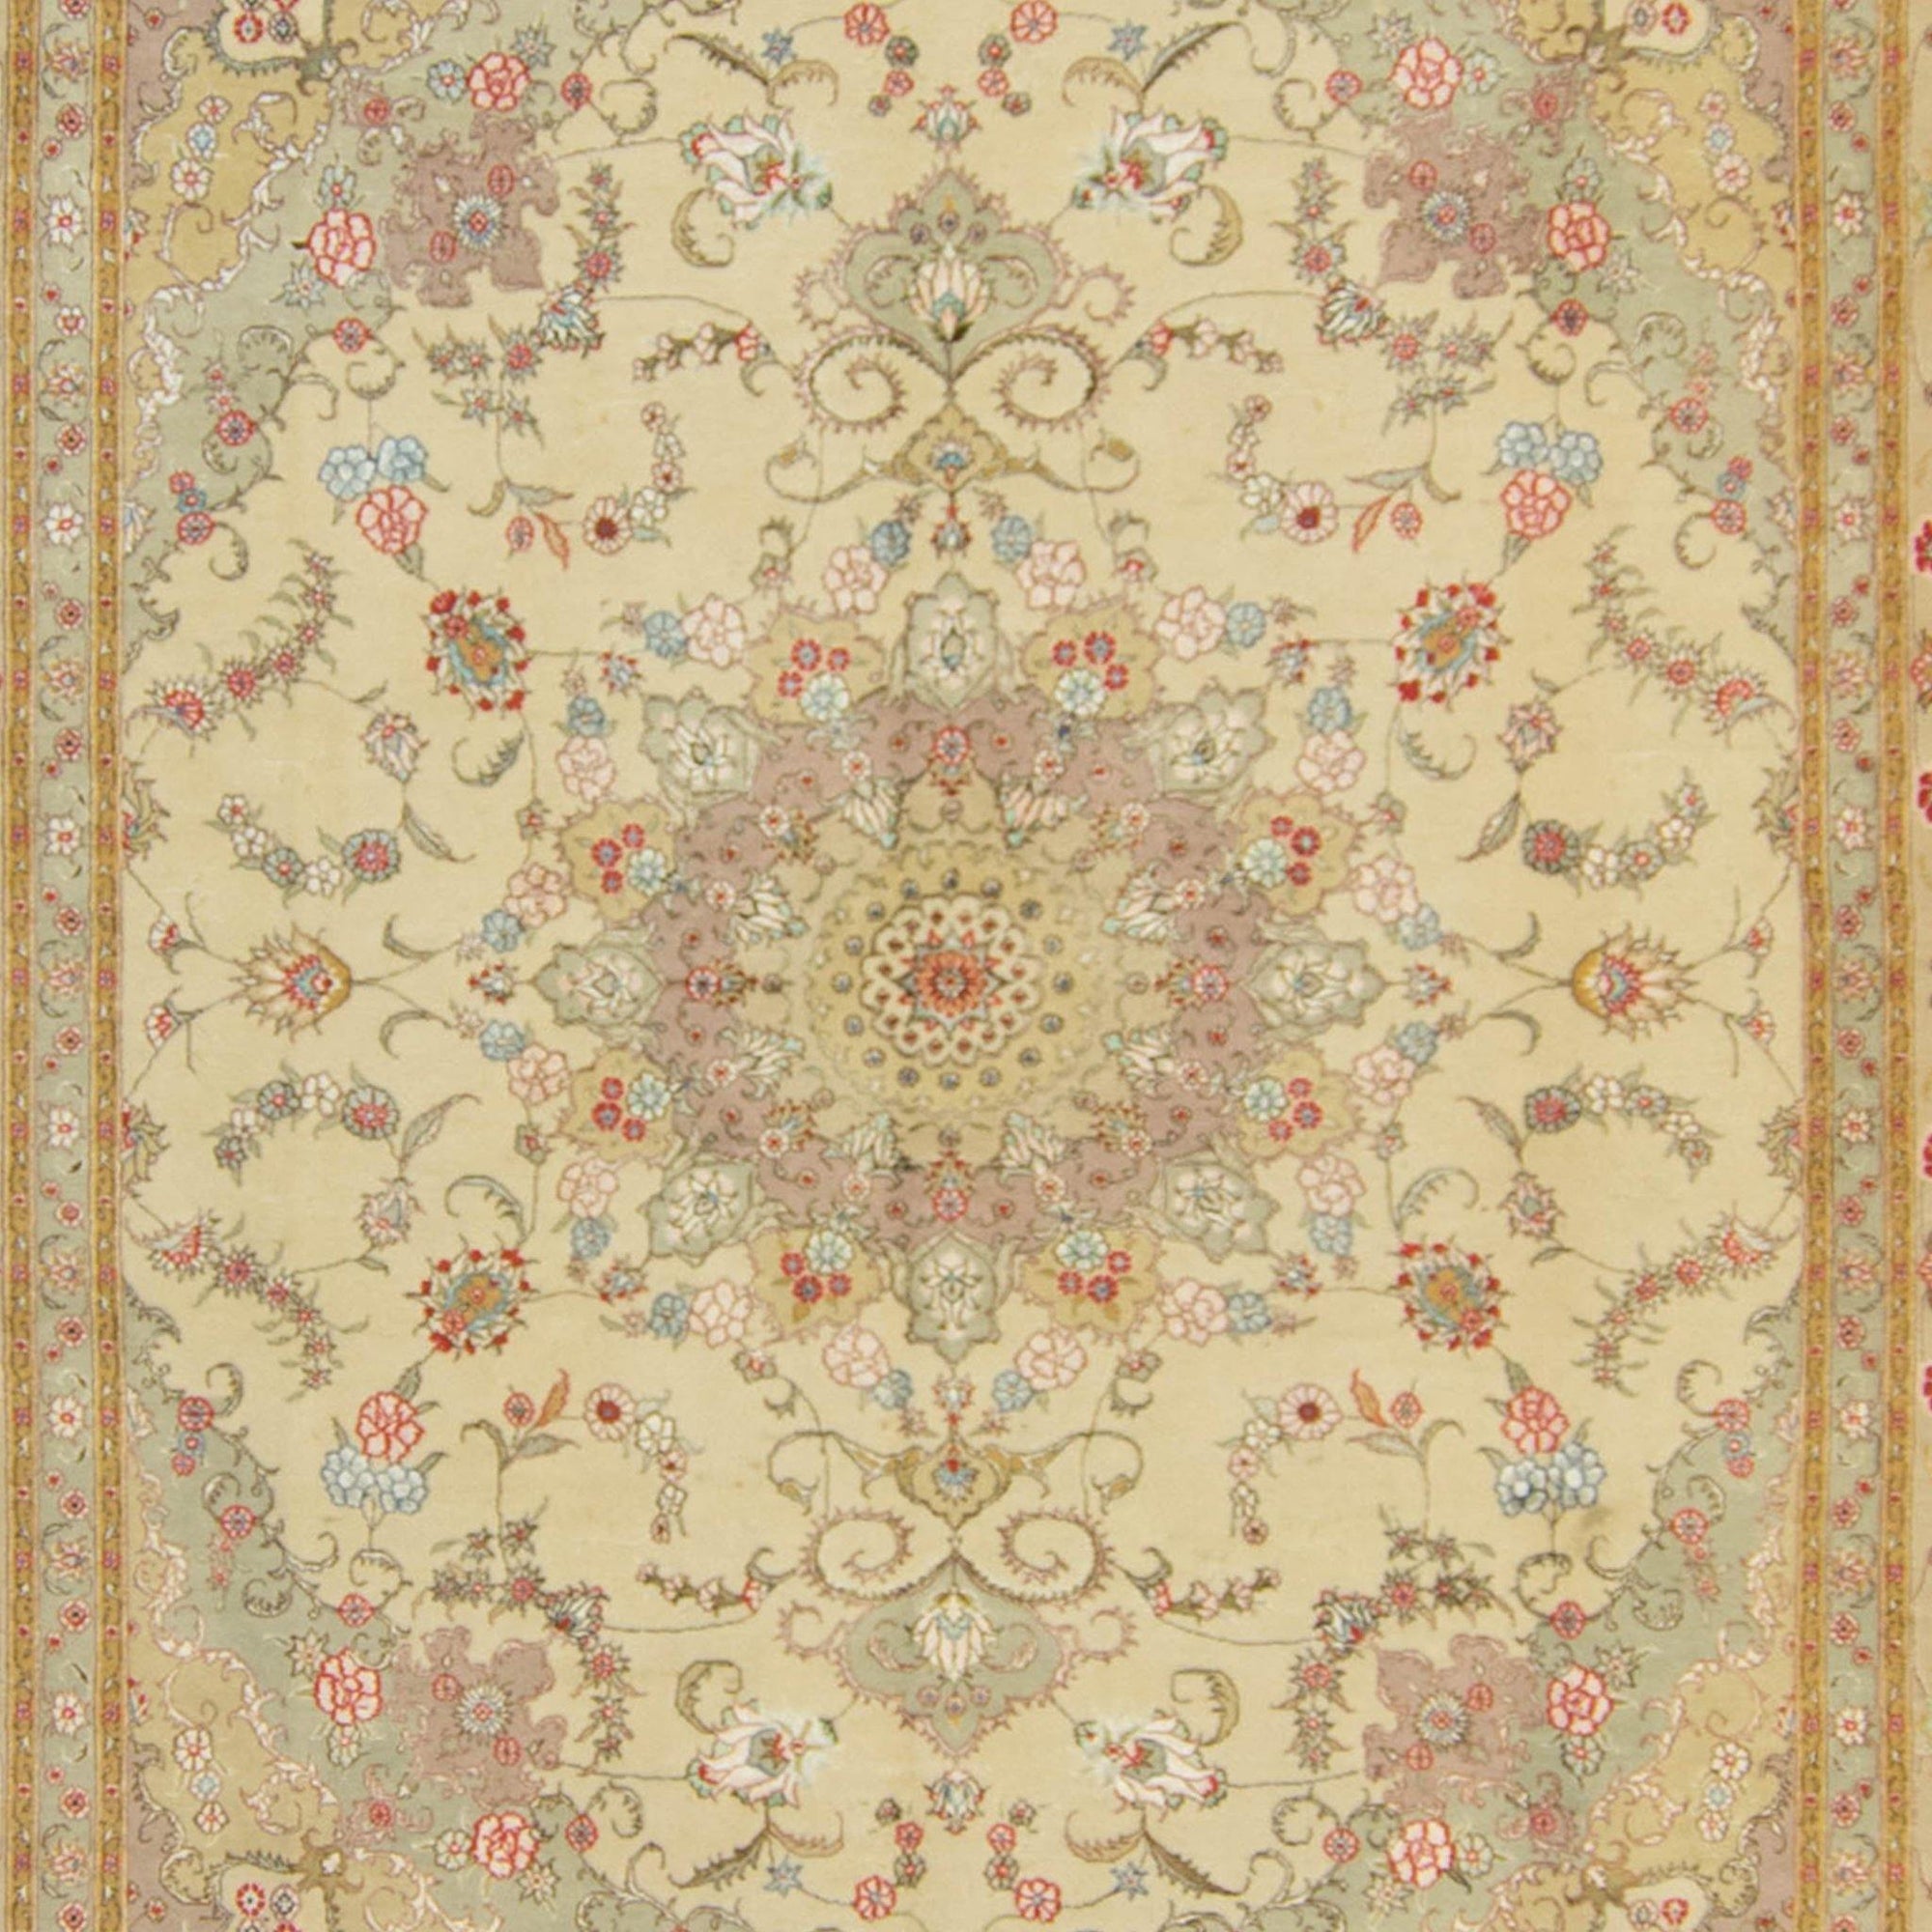 Fine Hand-knotted Persian Tabriz Rug 244cm x 305cm